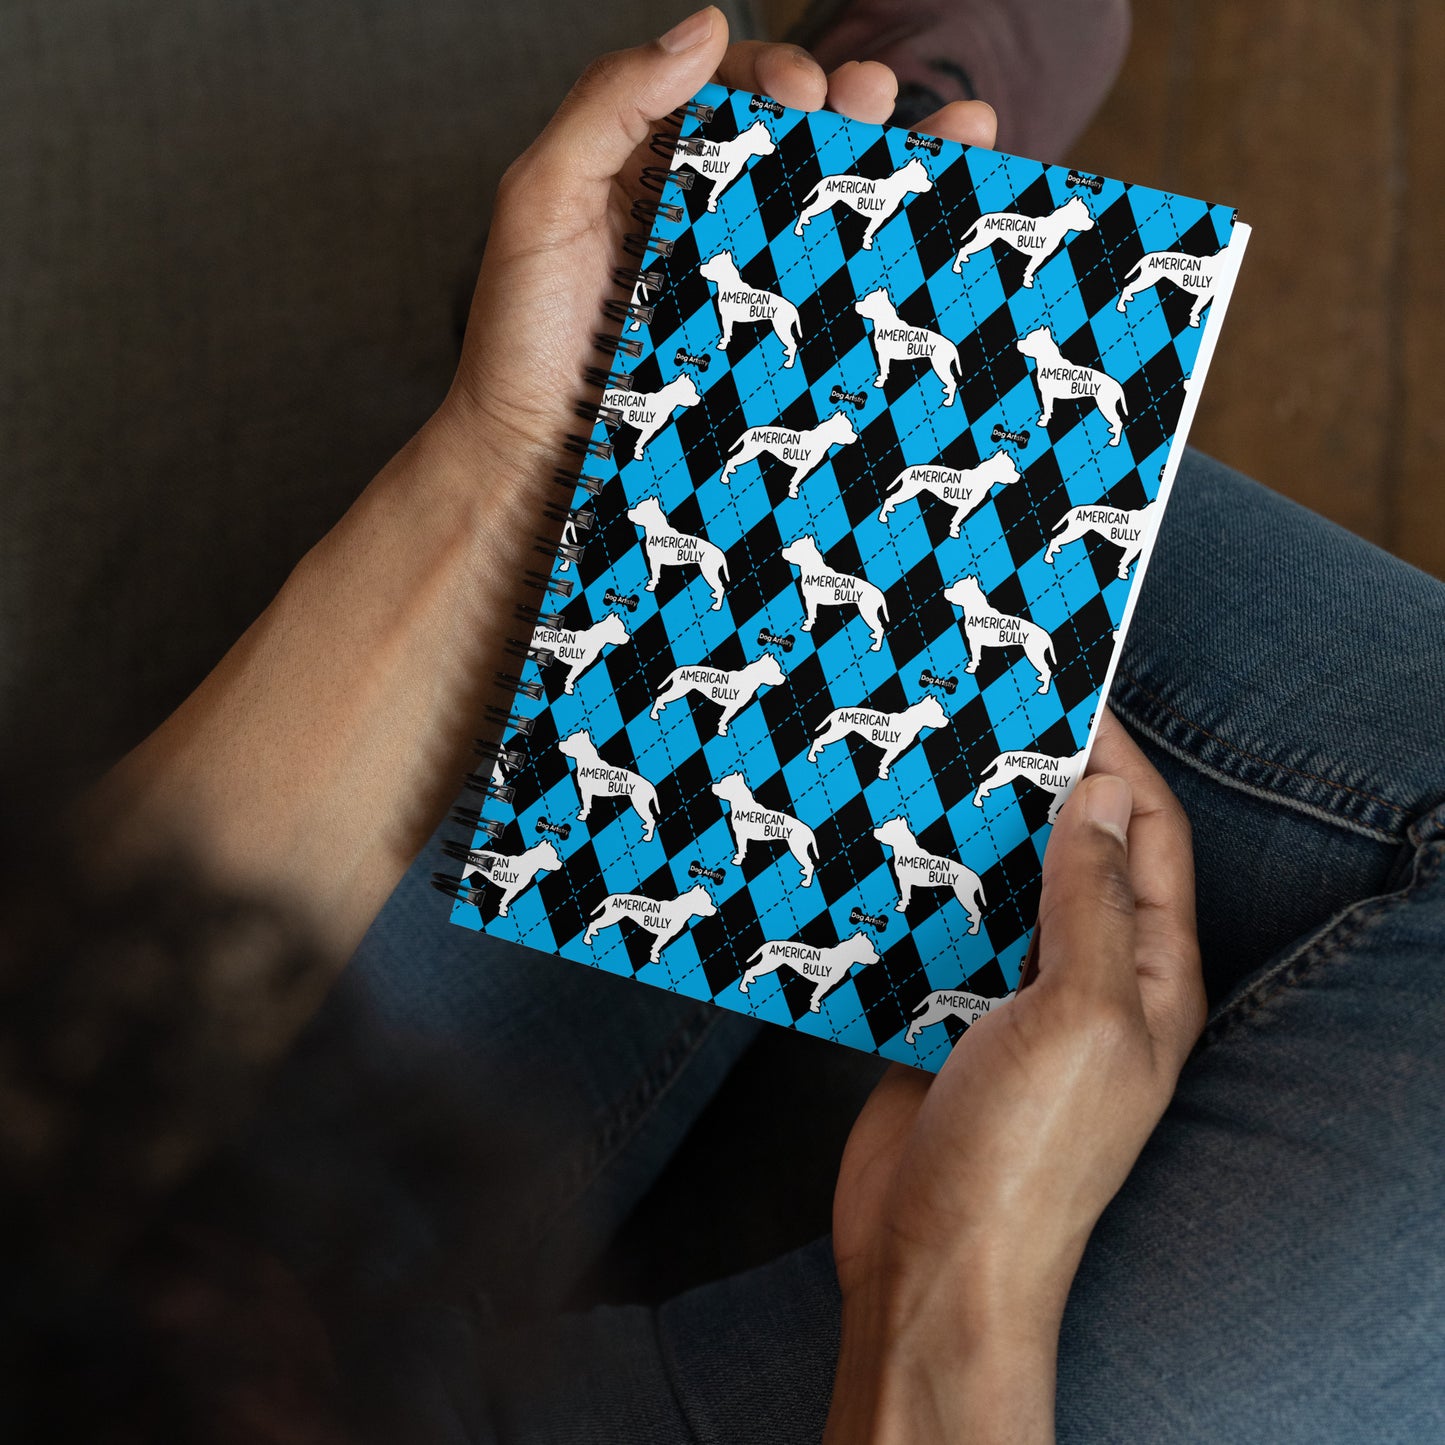 American Bully Argyle Blue and Black Spiral Notebooks